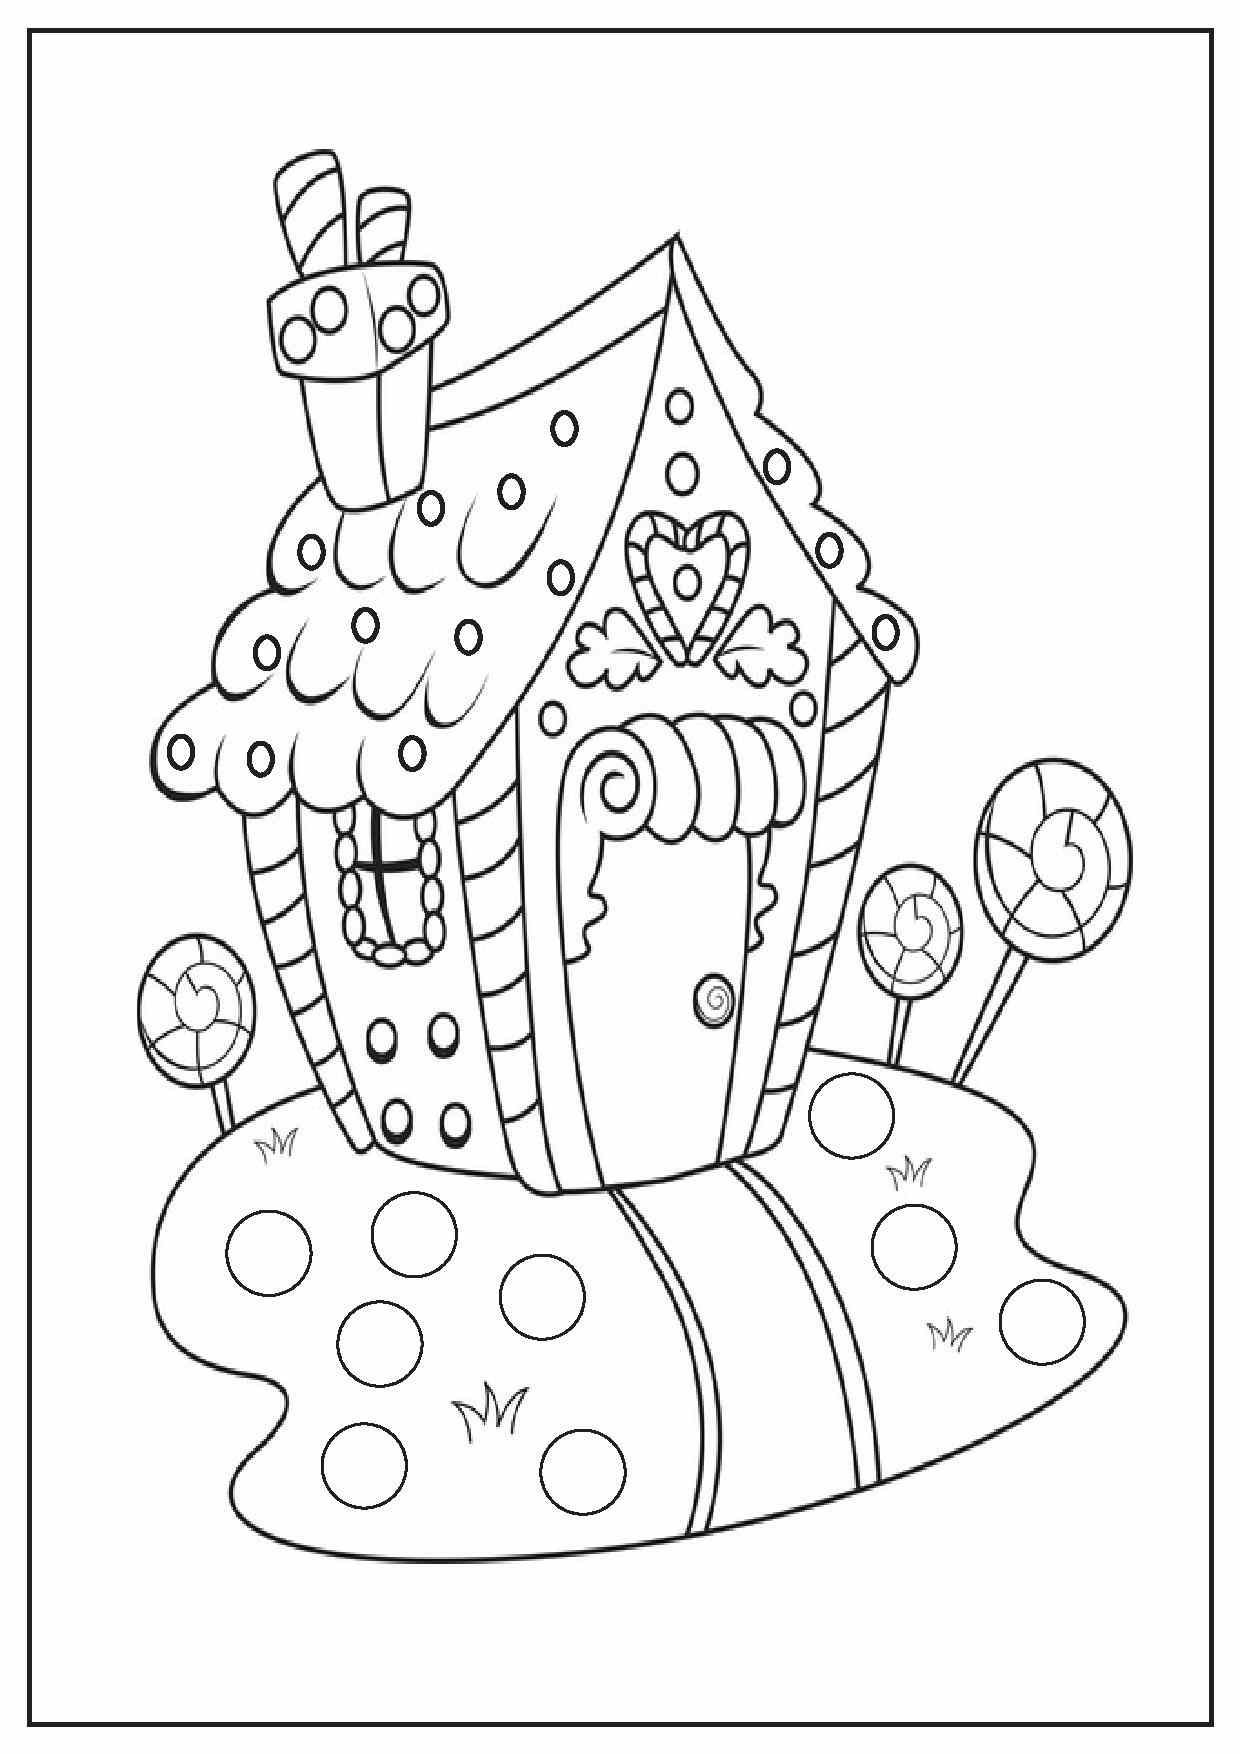 Kindergarten Coloring Sheets | Only Coloring Pages